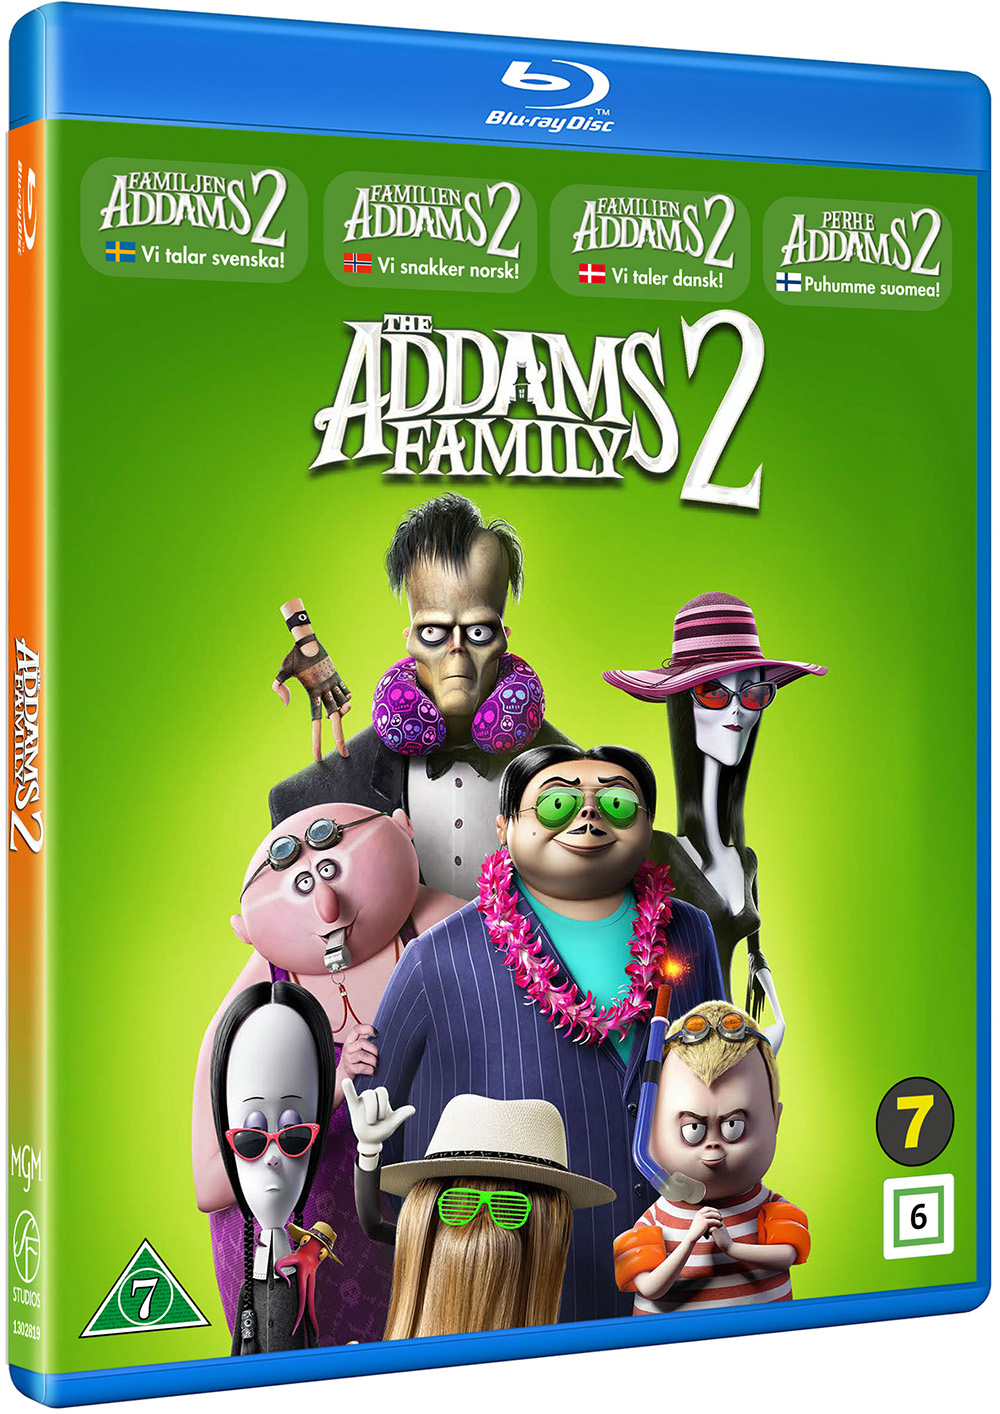 The Addams Family 2 (BD)